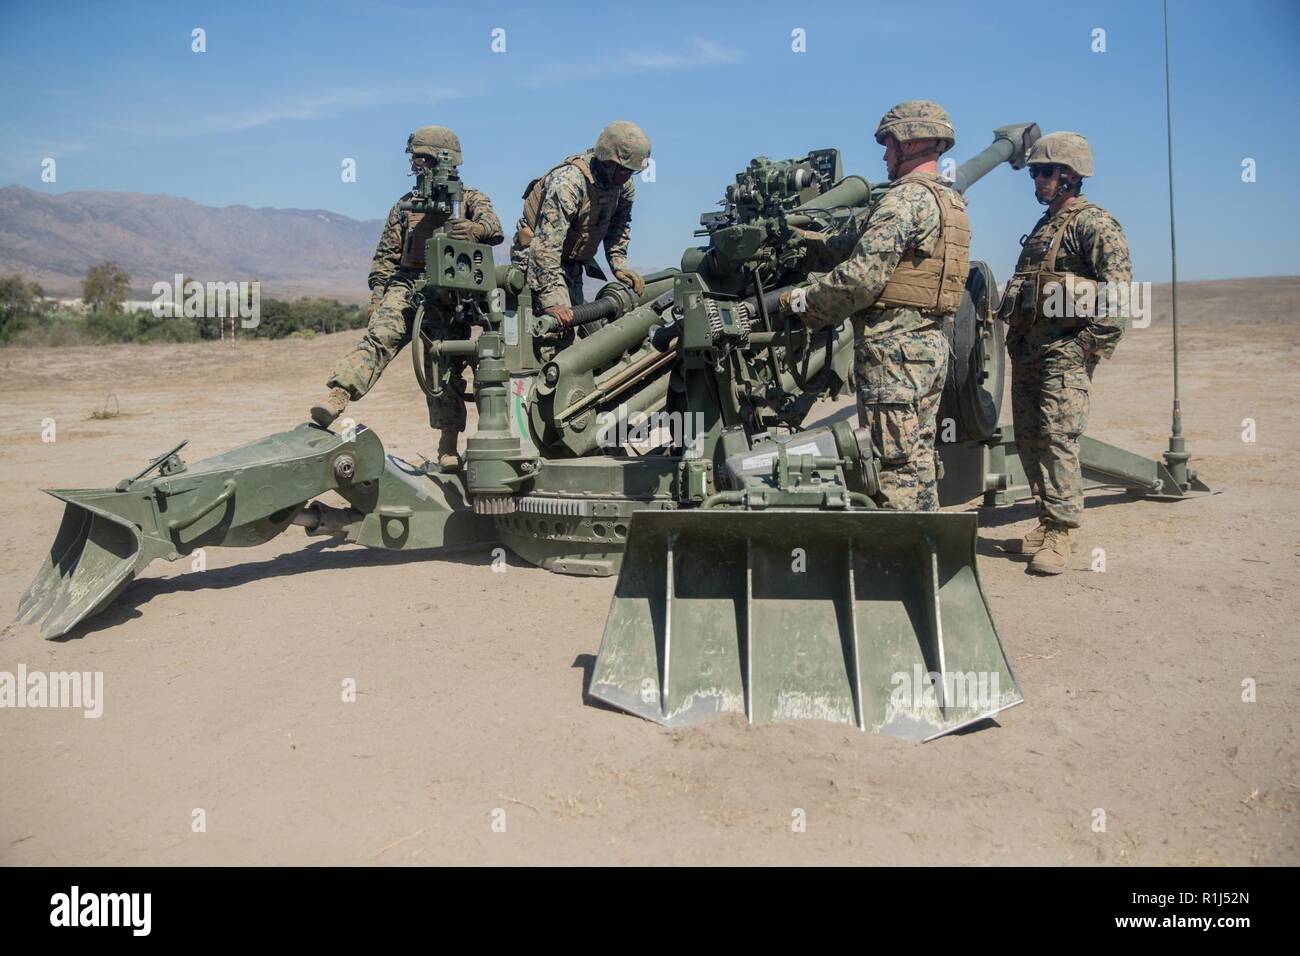 U.S. Marines with India Battery, 3rd Battalion, 11th Marine Regiment, 1st Marine Division, conducts a practical application assessment on an M777 155mm Howitzer cannon during a Cannon Section Chief Course at Artillery Fire Area 18, Marine Corps Base Camp Pendleton, California, Sept. 27, 2018. The section chief is responsible for the safety of each Marine operating the Howitzer along with the training and proficiency of the section. Stock Photo